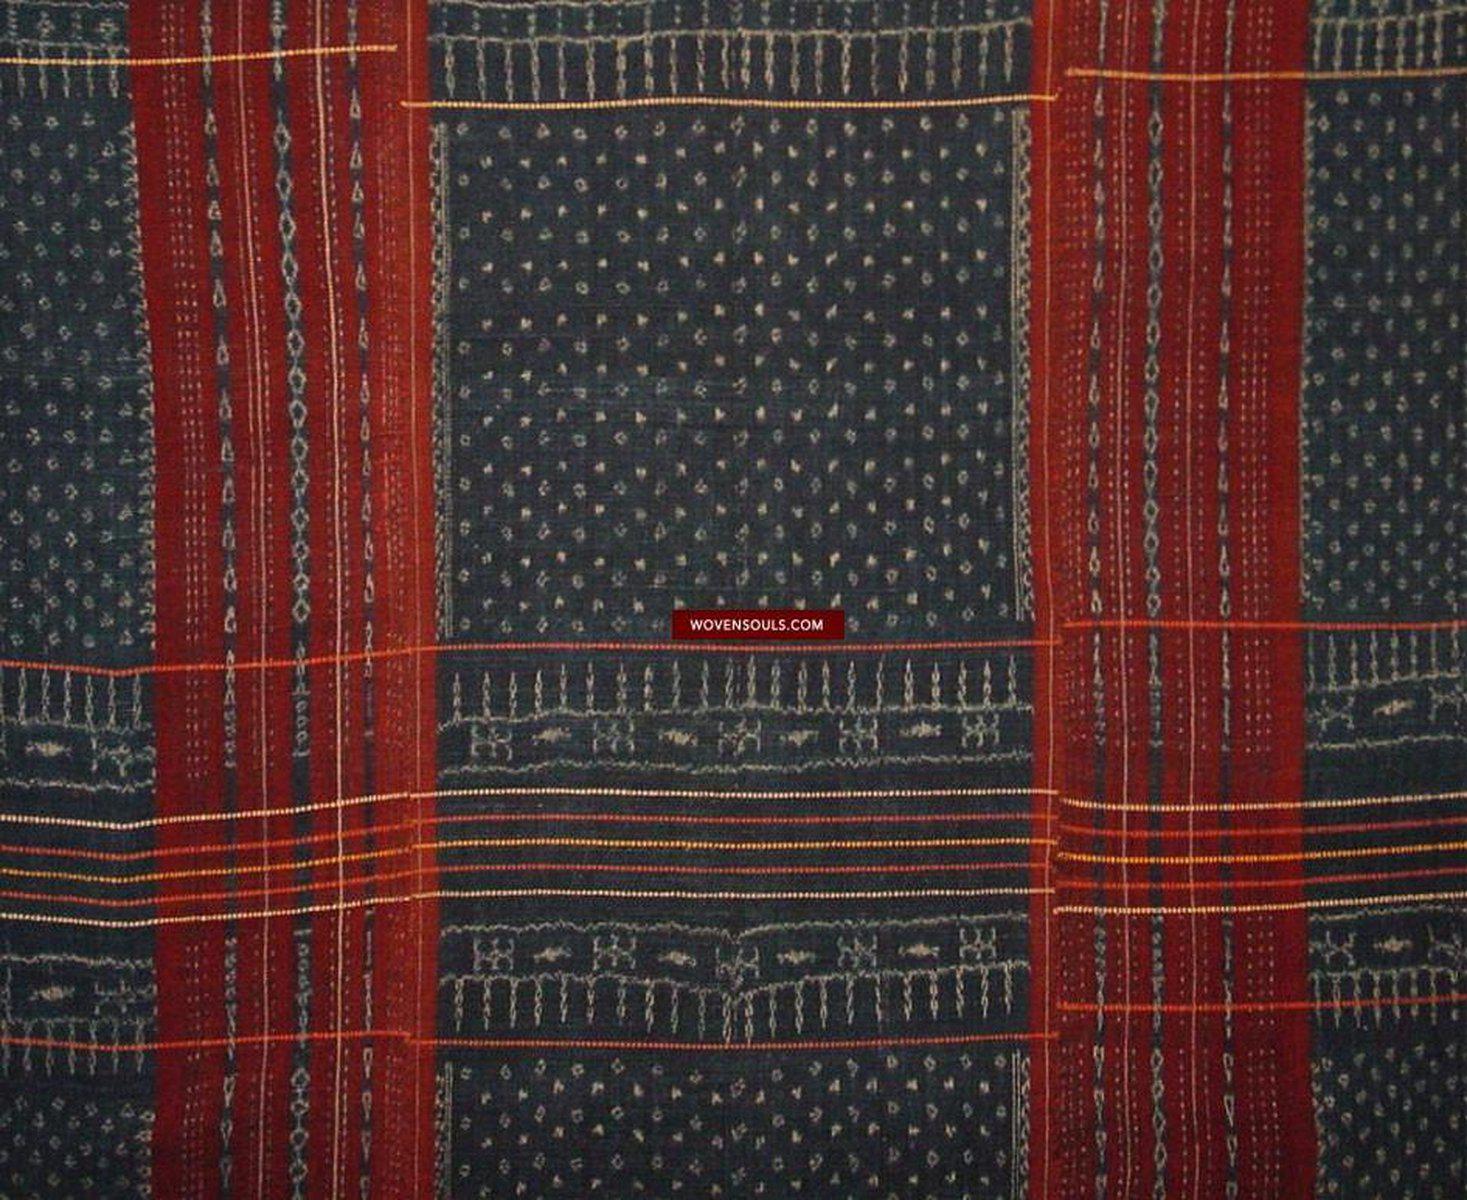 873 SOLD Large Old Gorgeous Flores Ikat Weaving from Nage Keo-WOVENSOULS-Antique-Vintage-Textiles-Art-Decor